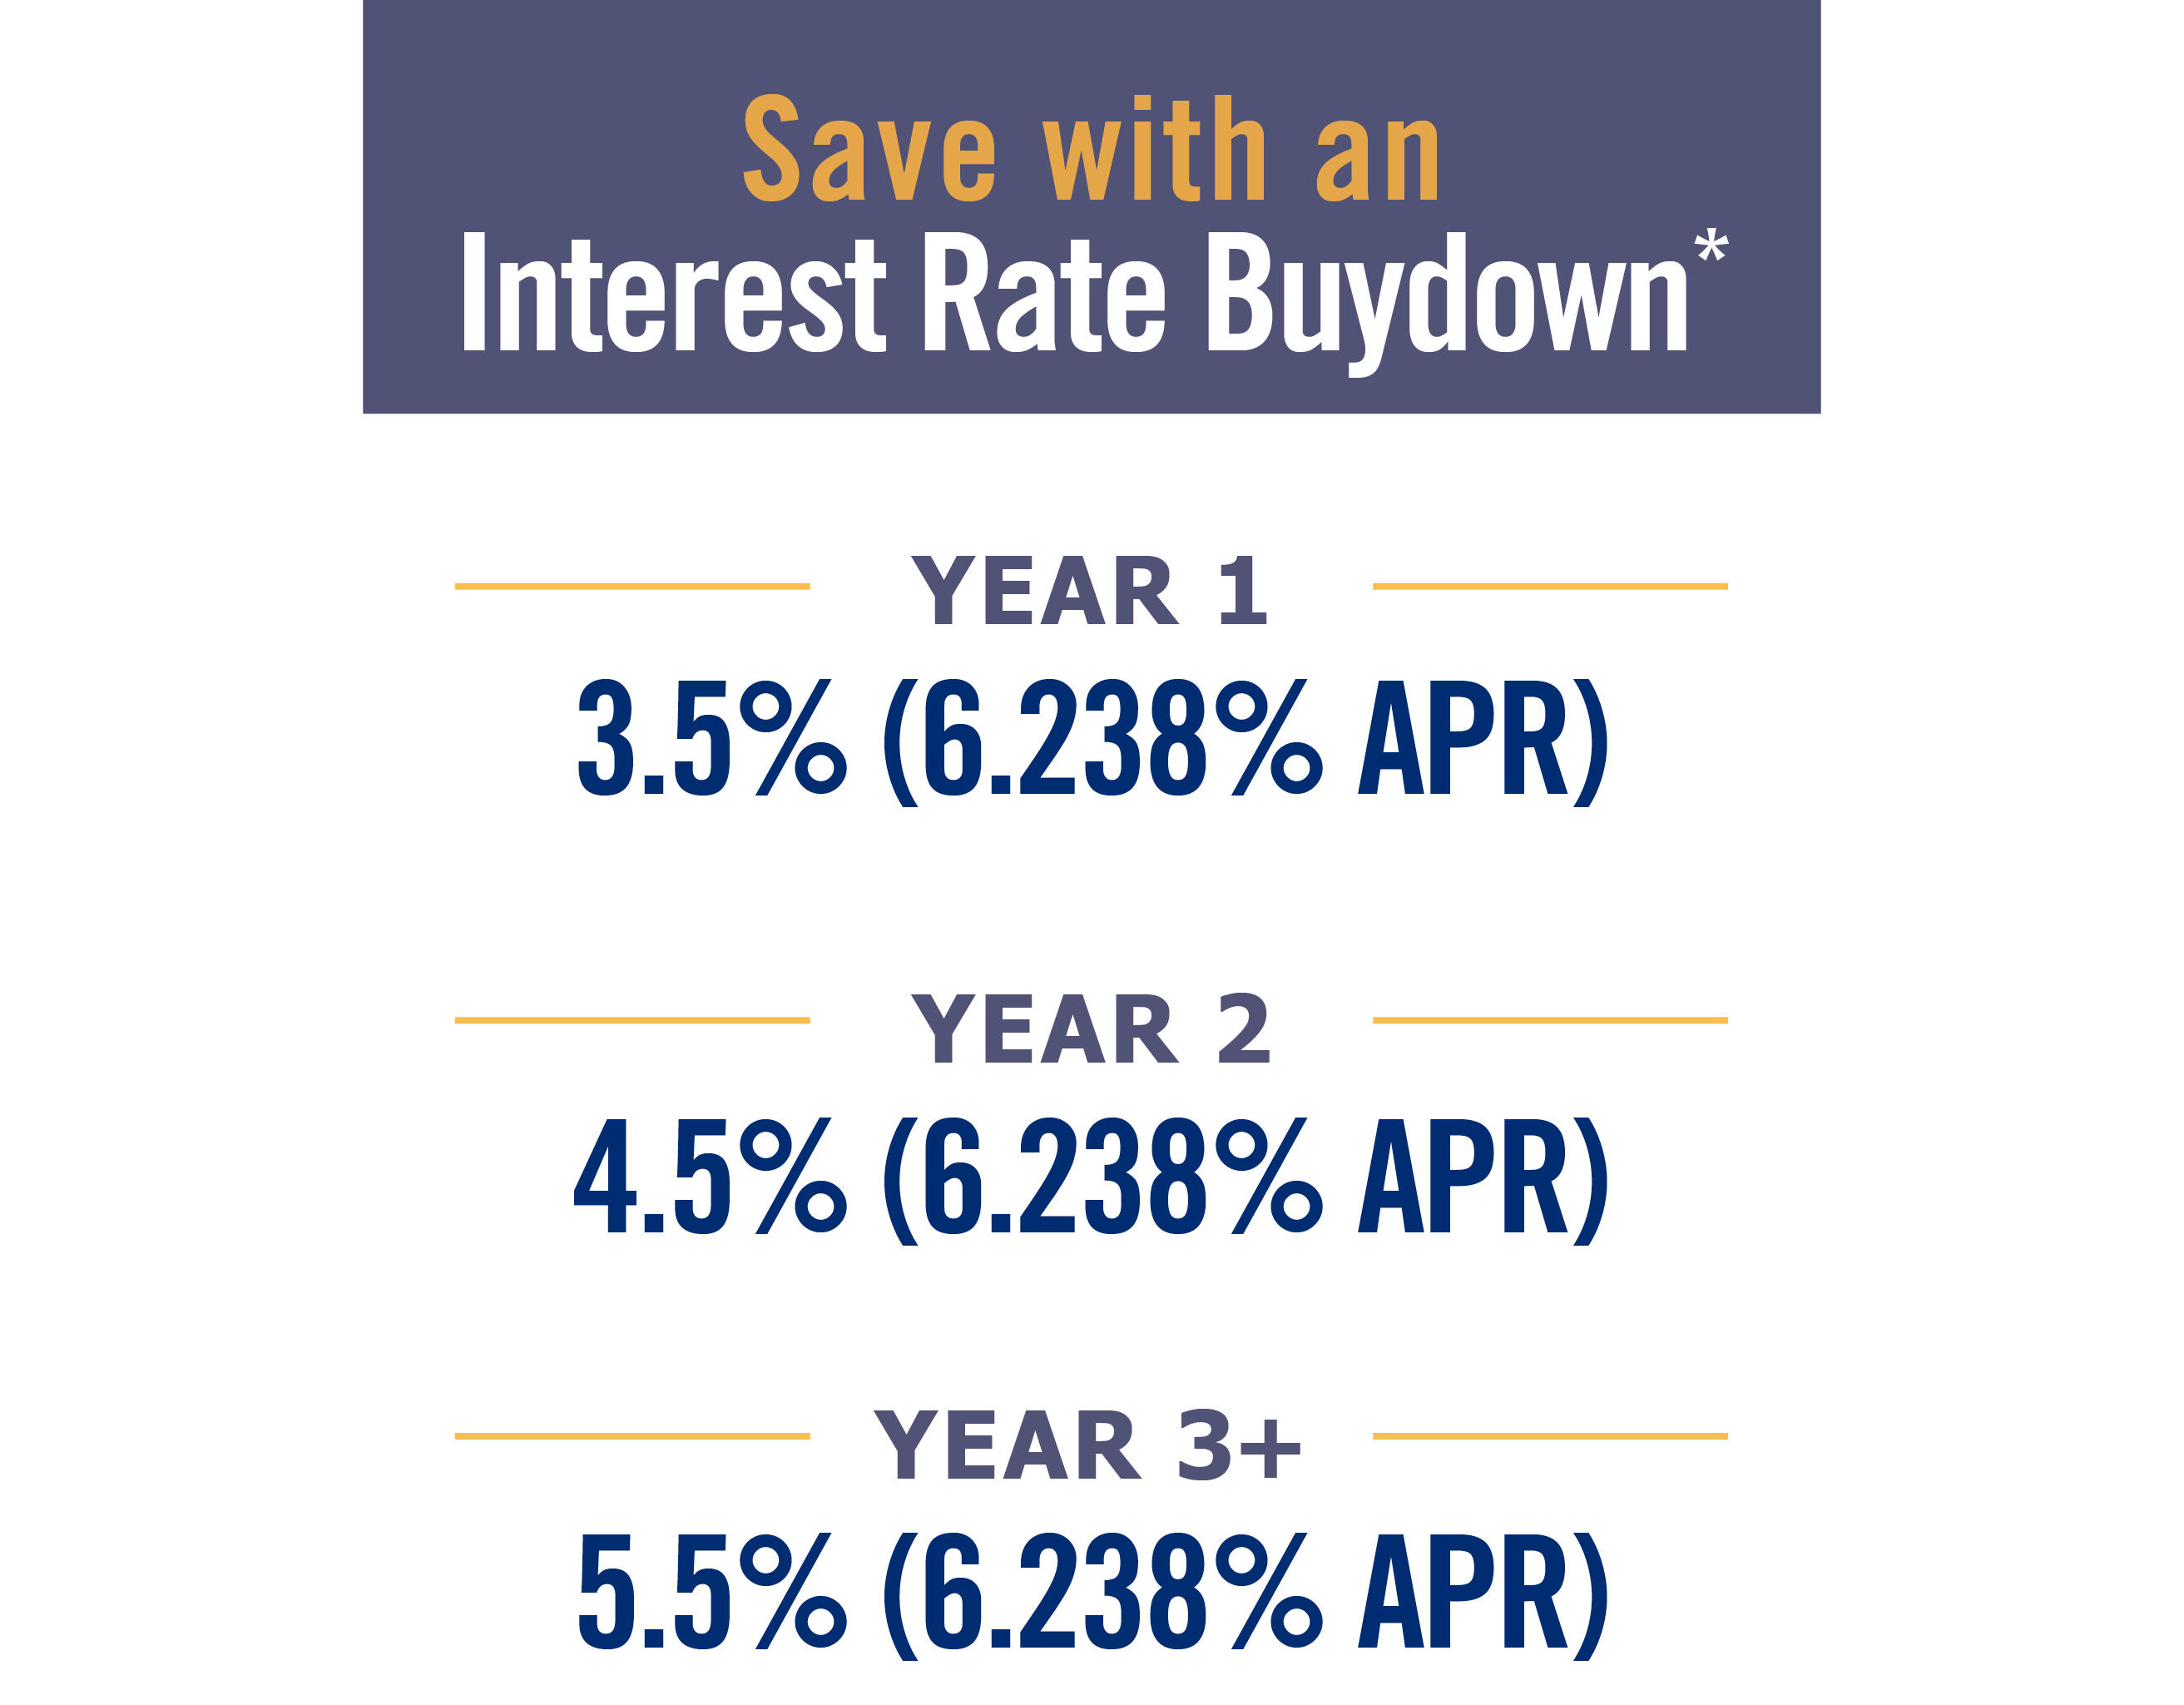 Save with an interest rate buydown*